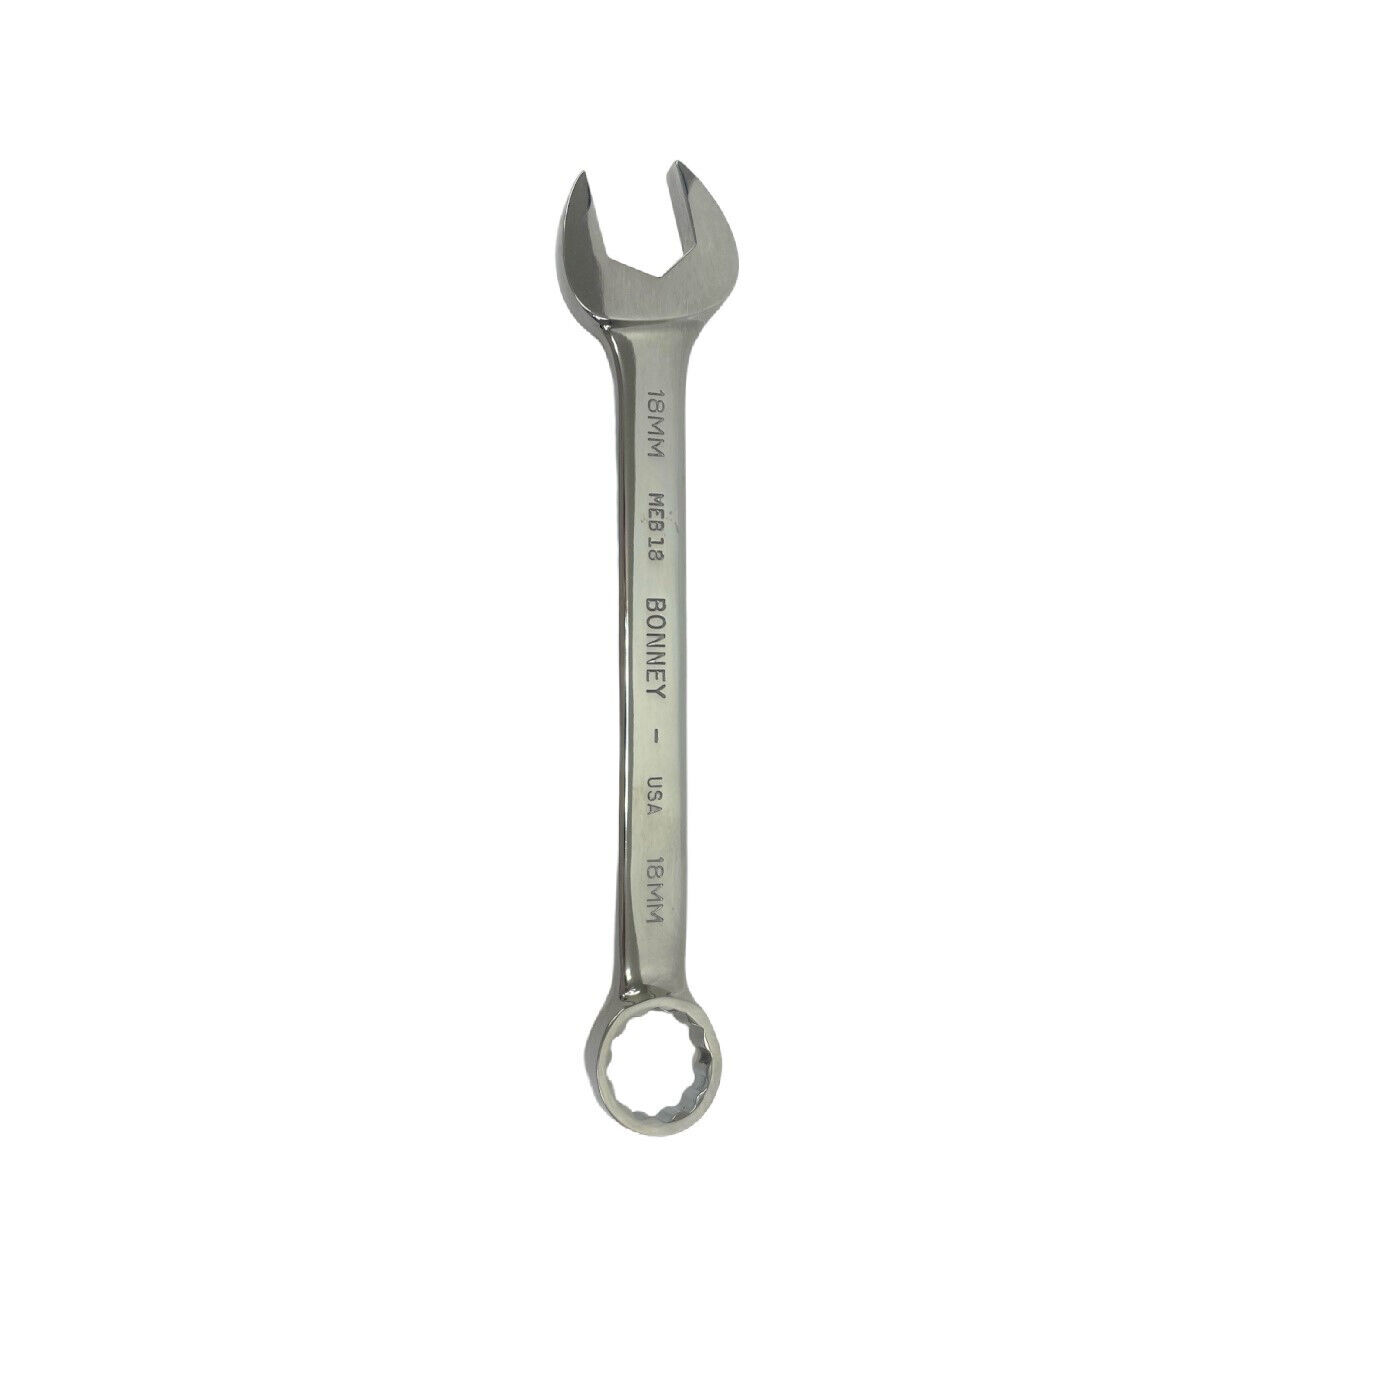 Bonney 18MM Combination Wrench MED18 USA Made